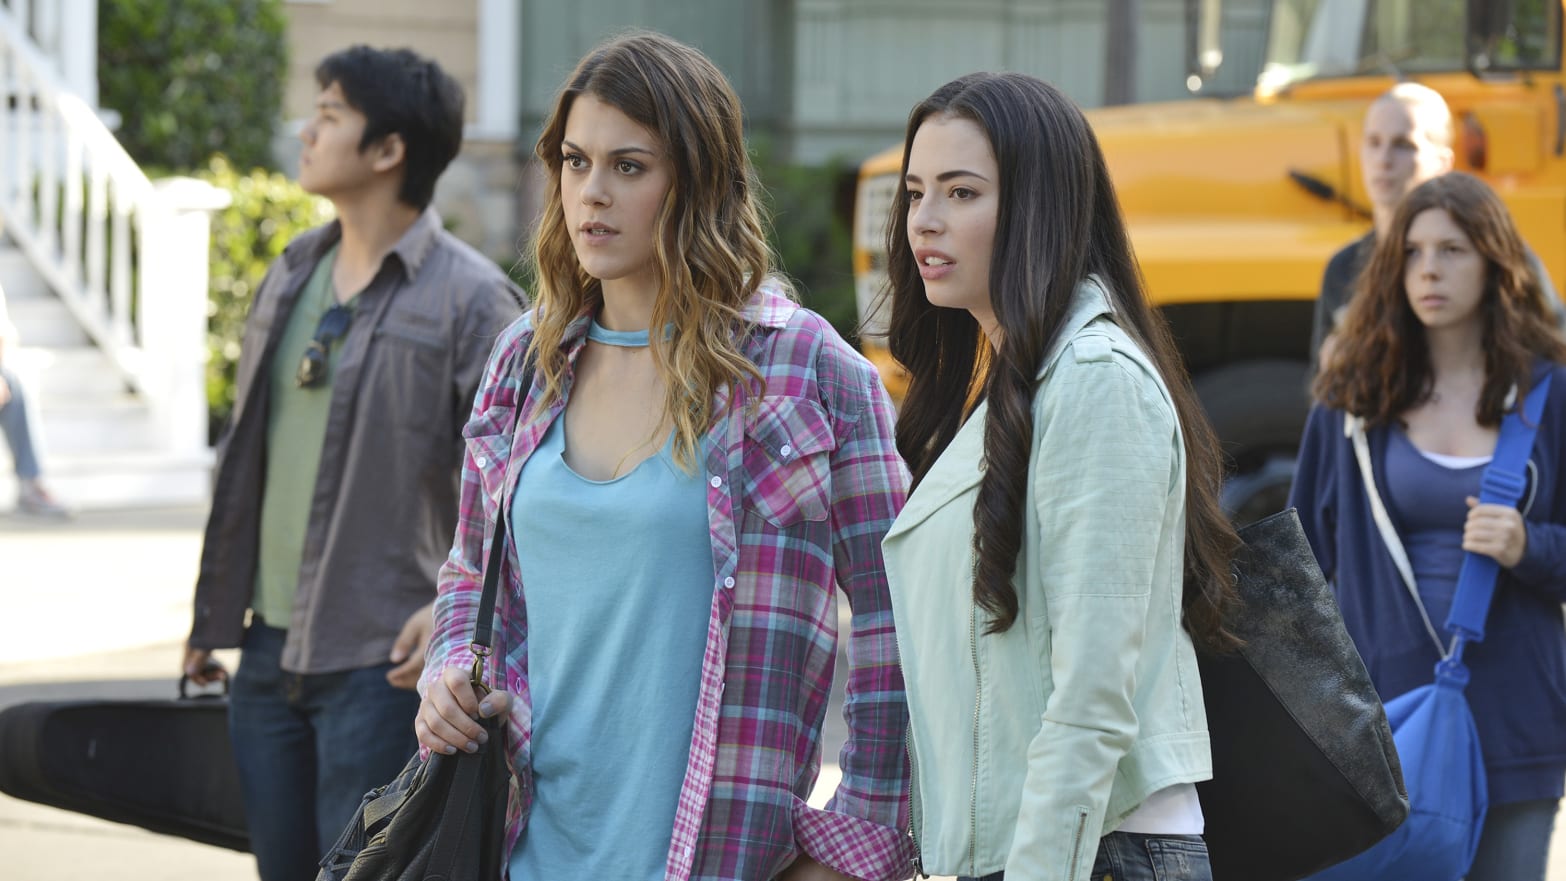 Lindsey Shaw in a still from "Pretty Little Liars"